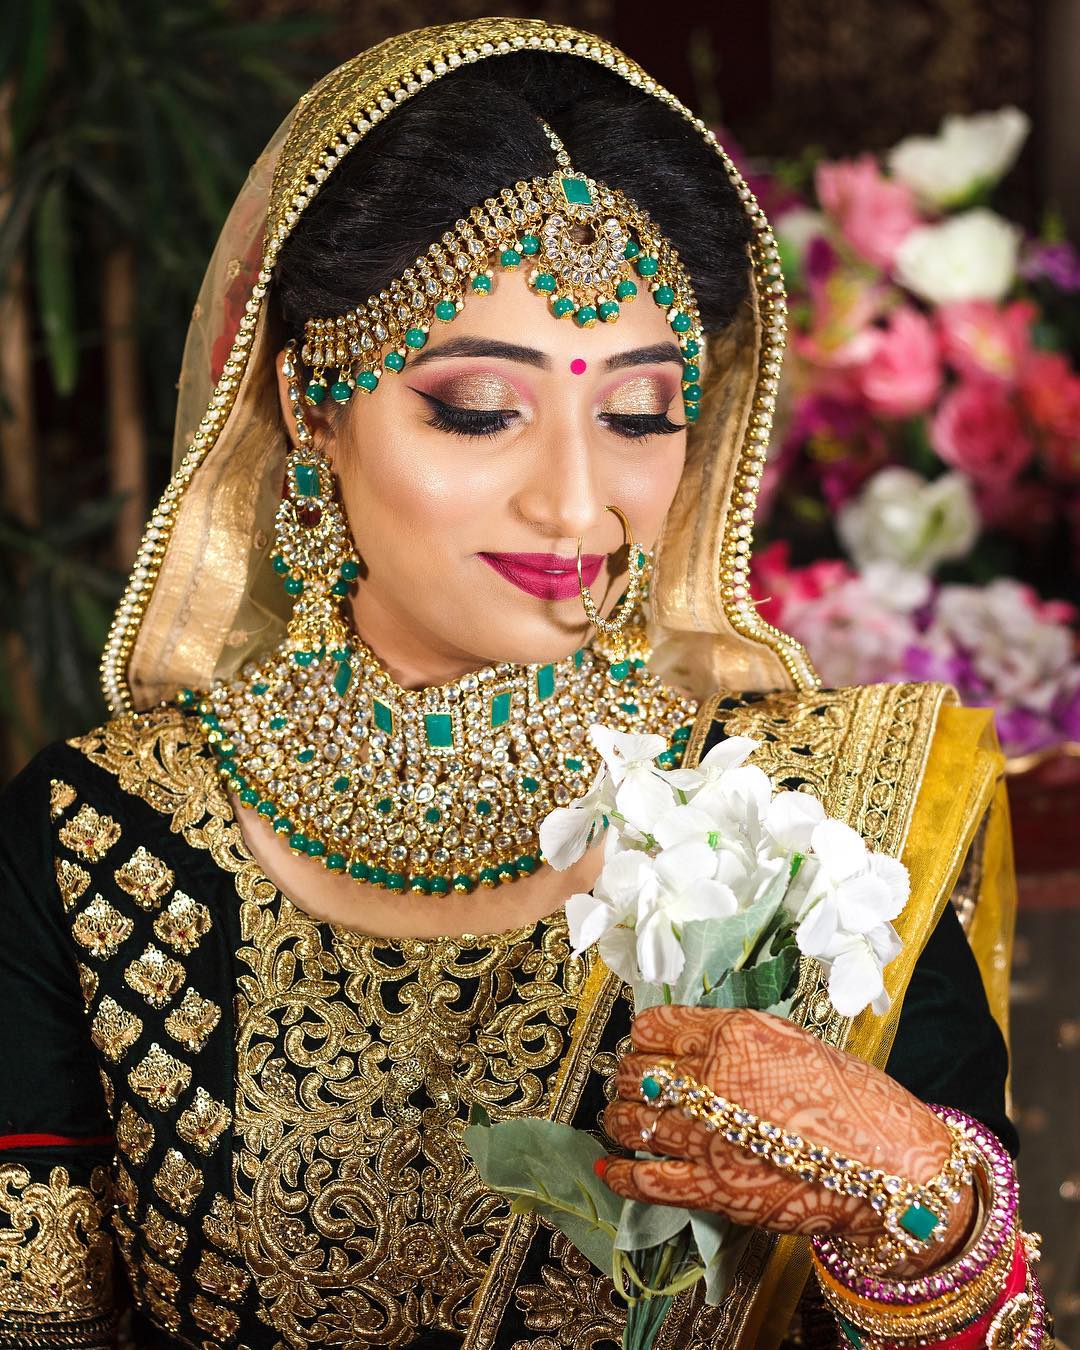 Real Bride Makeup With Elegant Jewelry